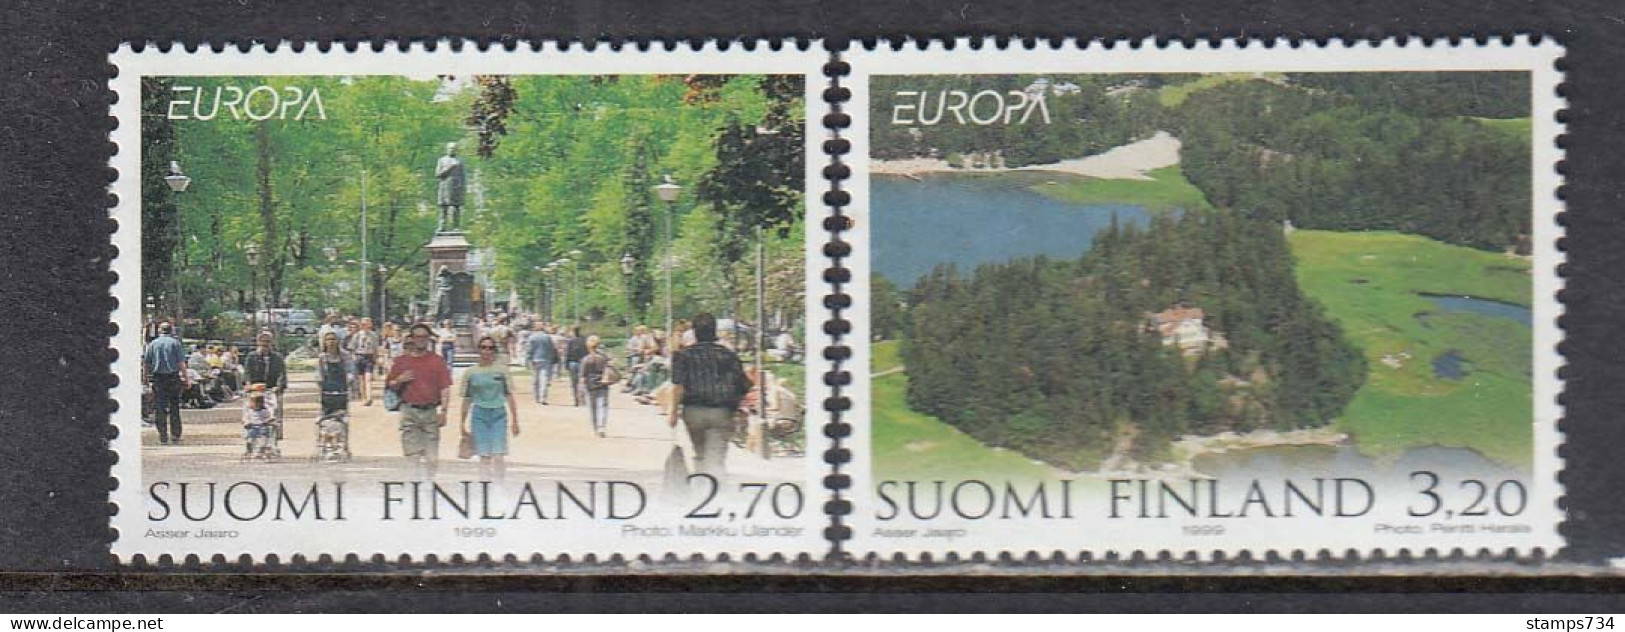 Finland 1999 - EUROPA: Nature And National Parks, Mi-Nr. 1474/75, MNH** - Neufs